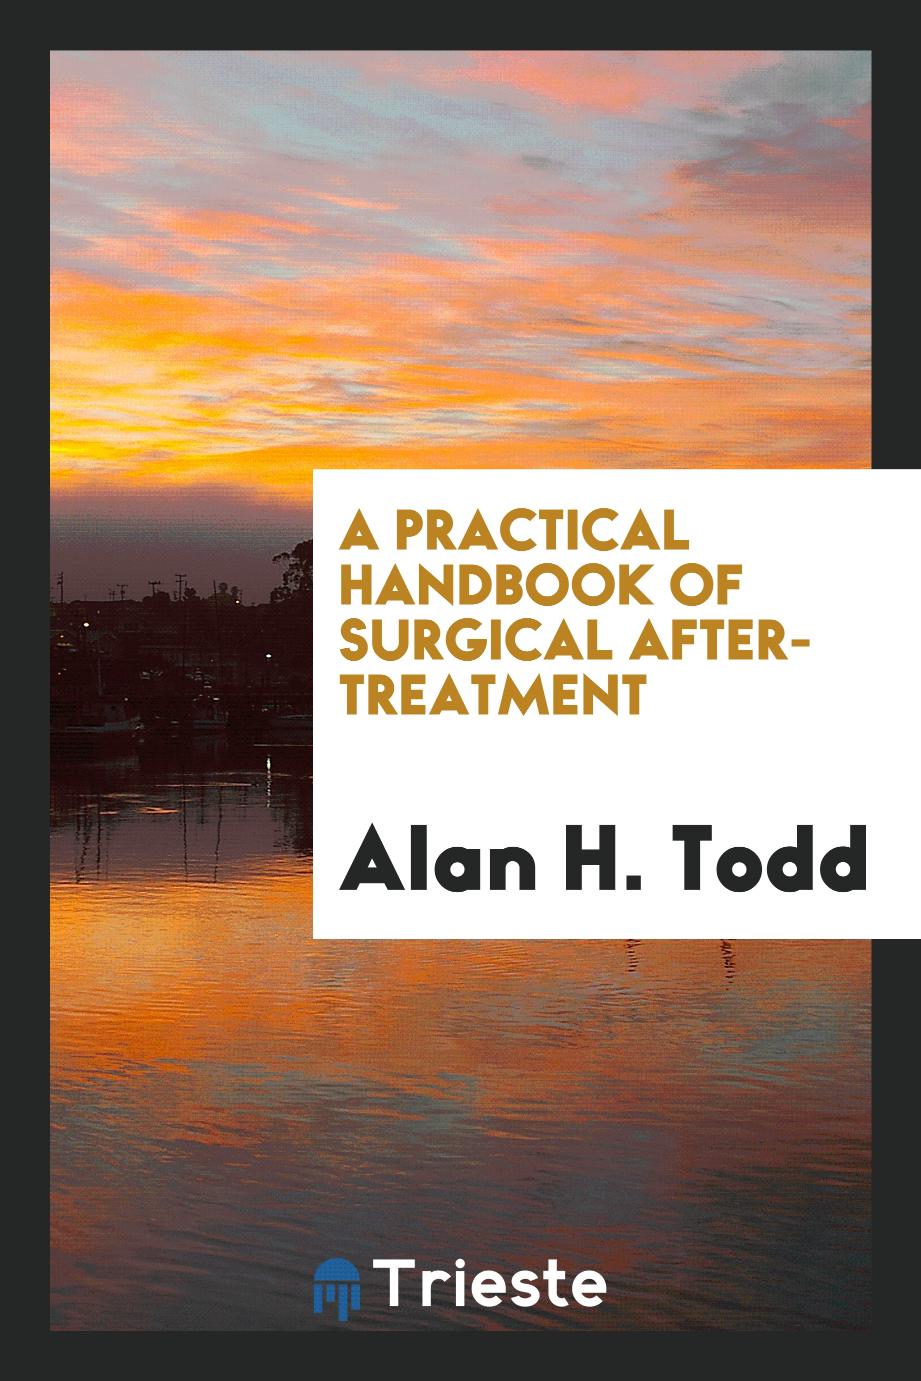 A practical handbook of surgical after-treatment